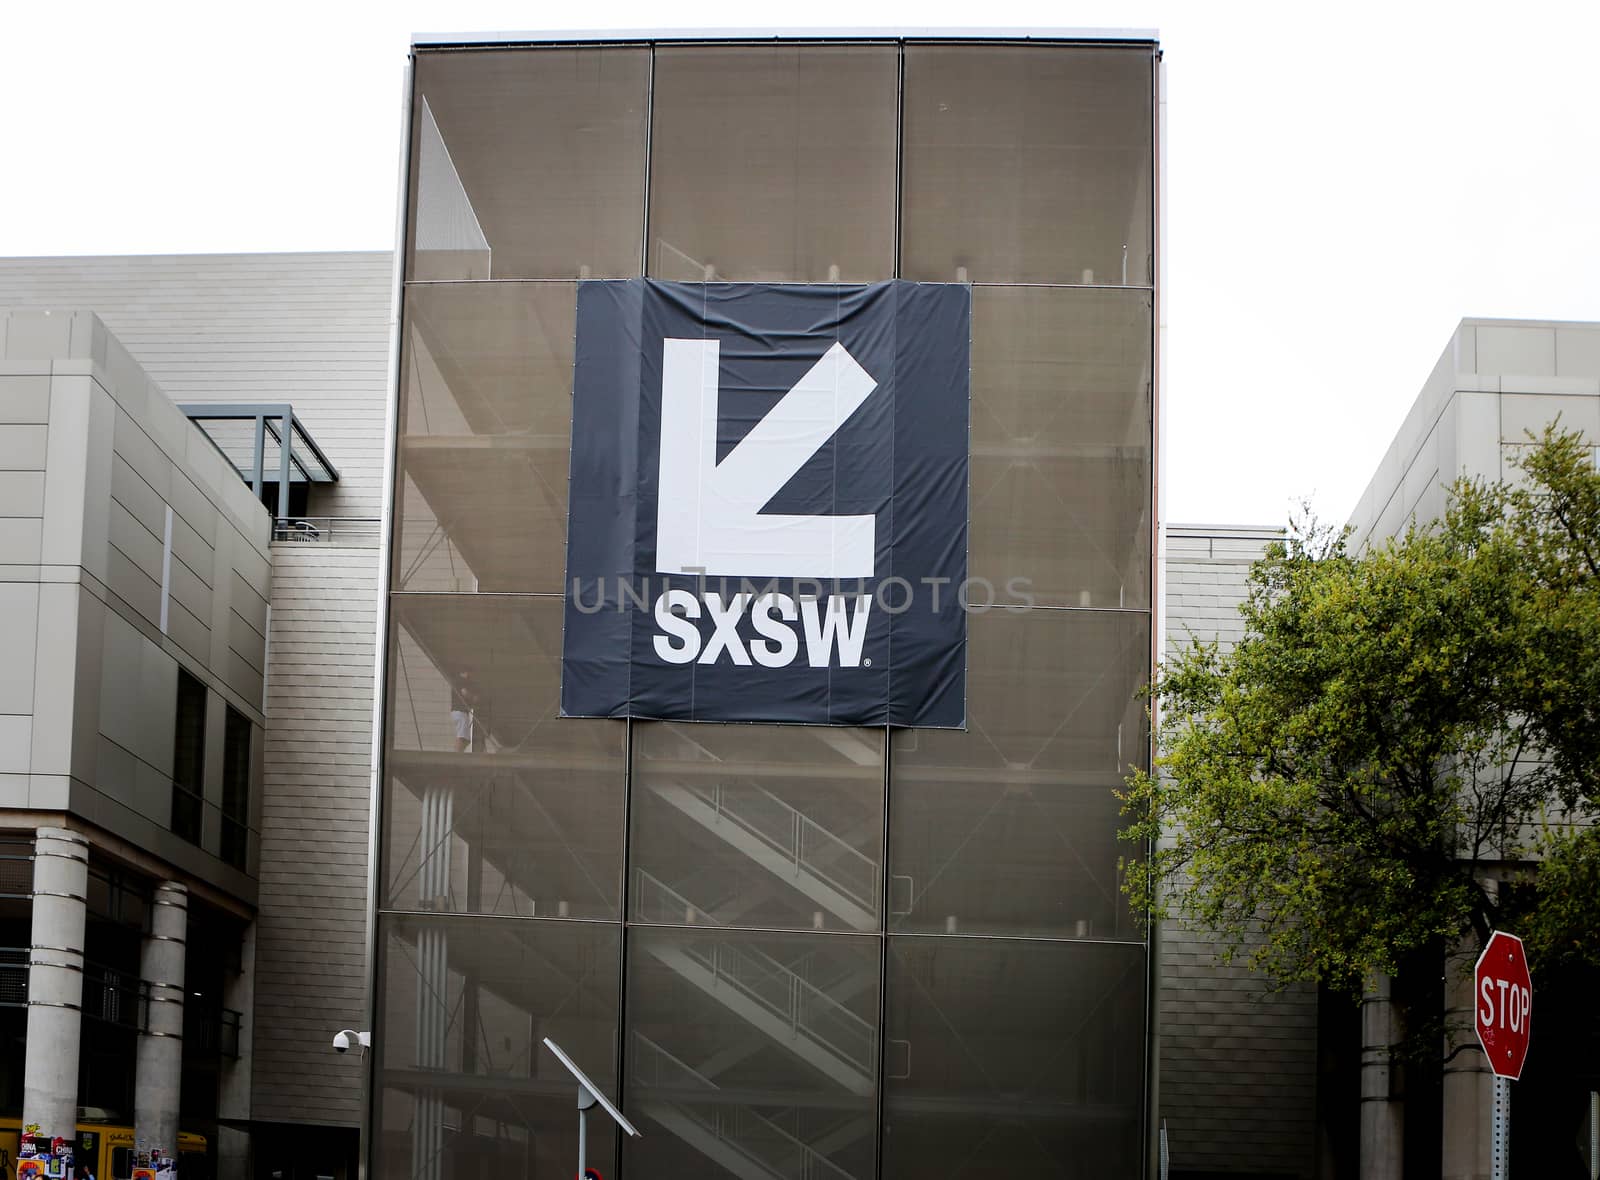 SXSW symbol on the building wall by GSPhotography